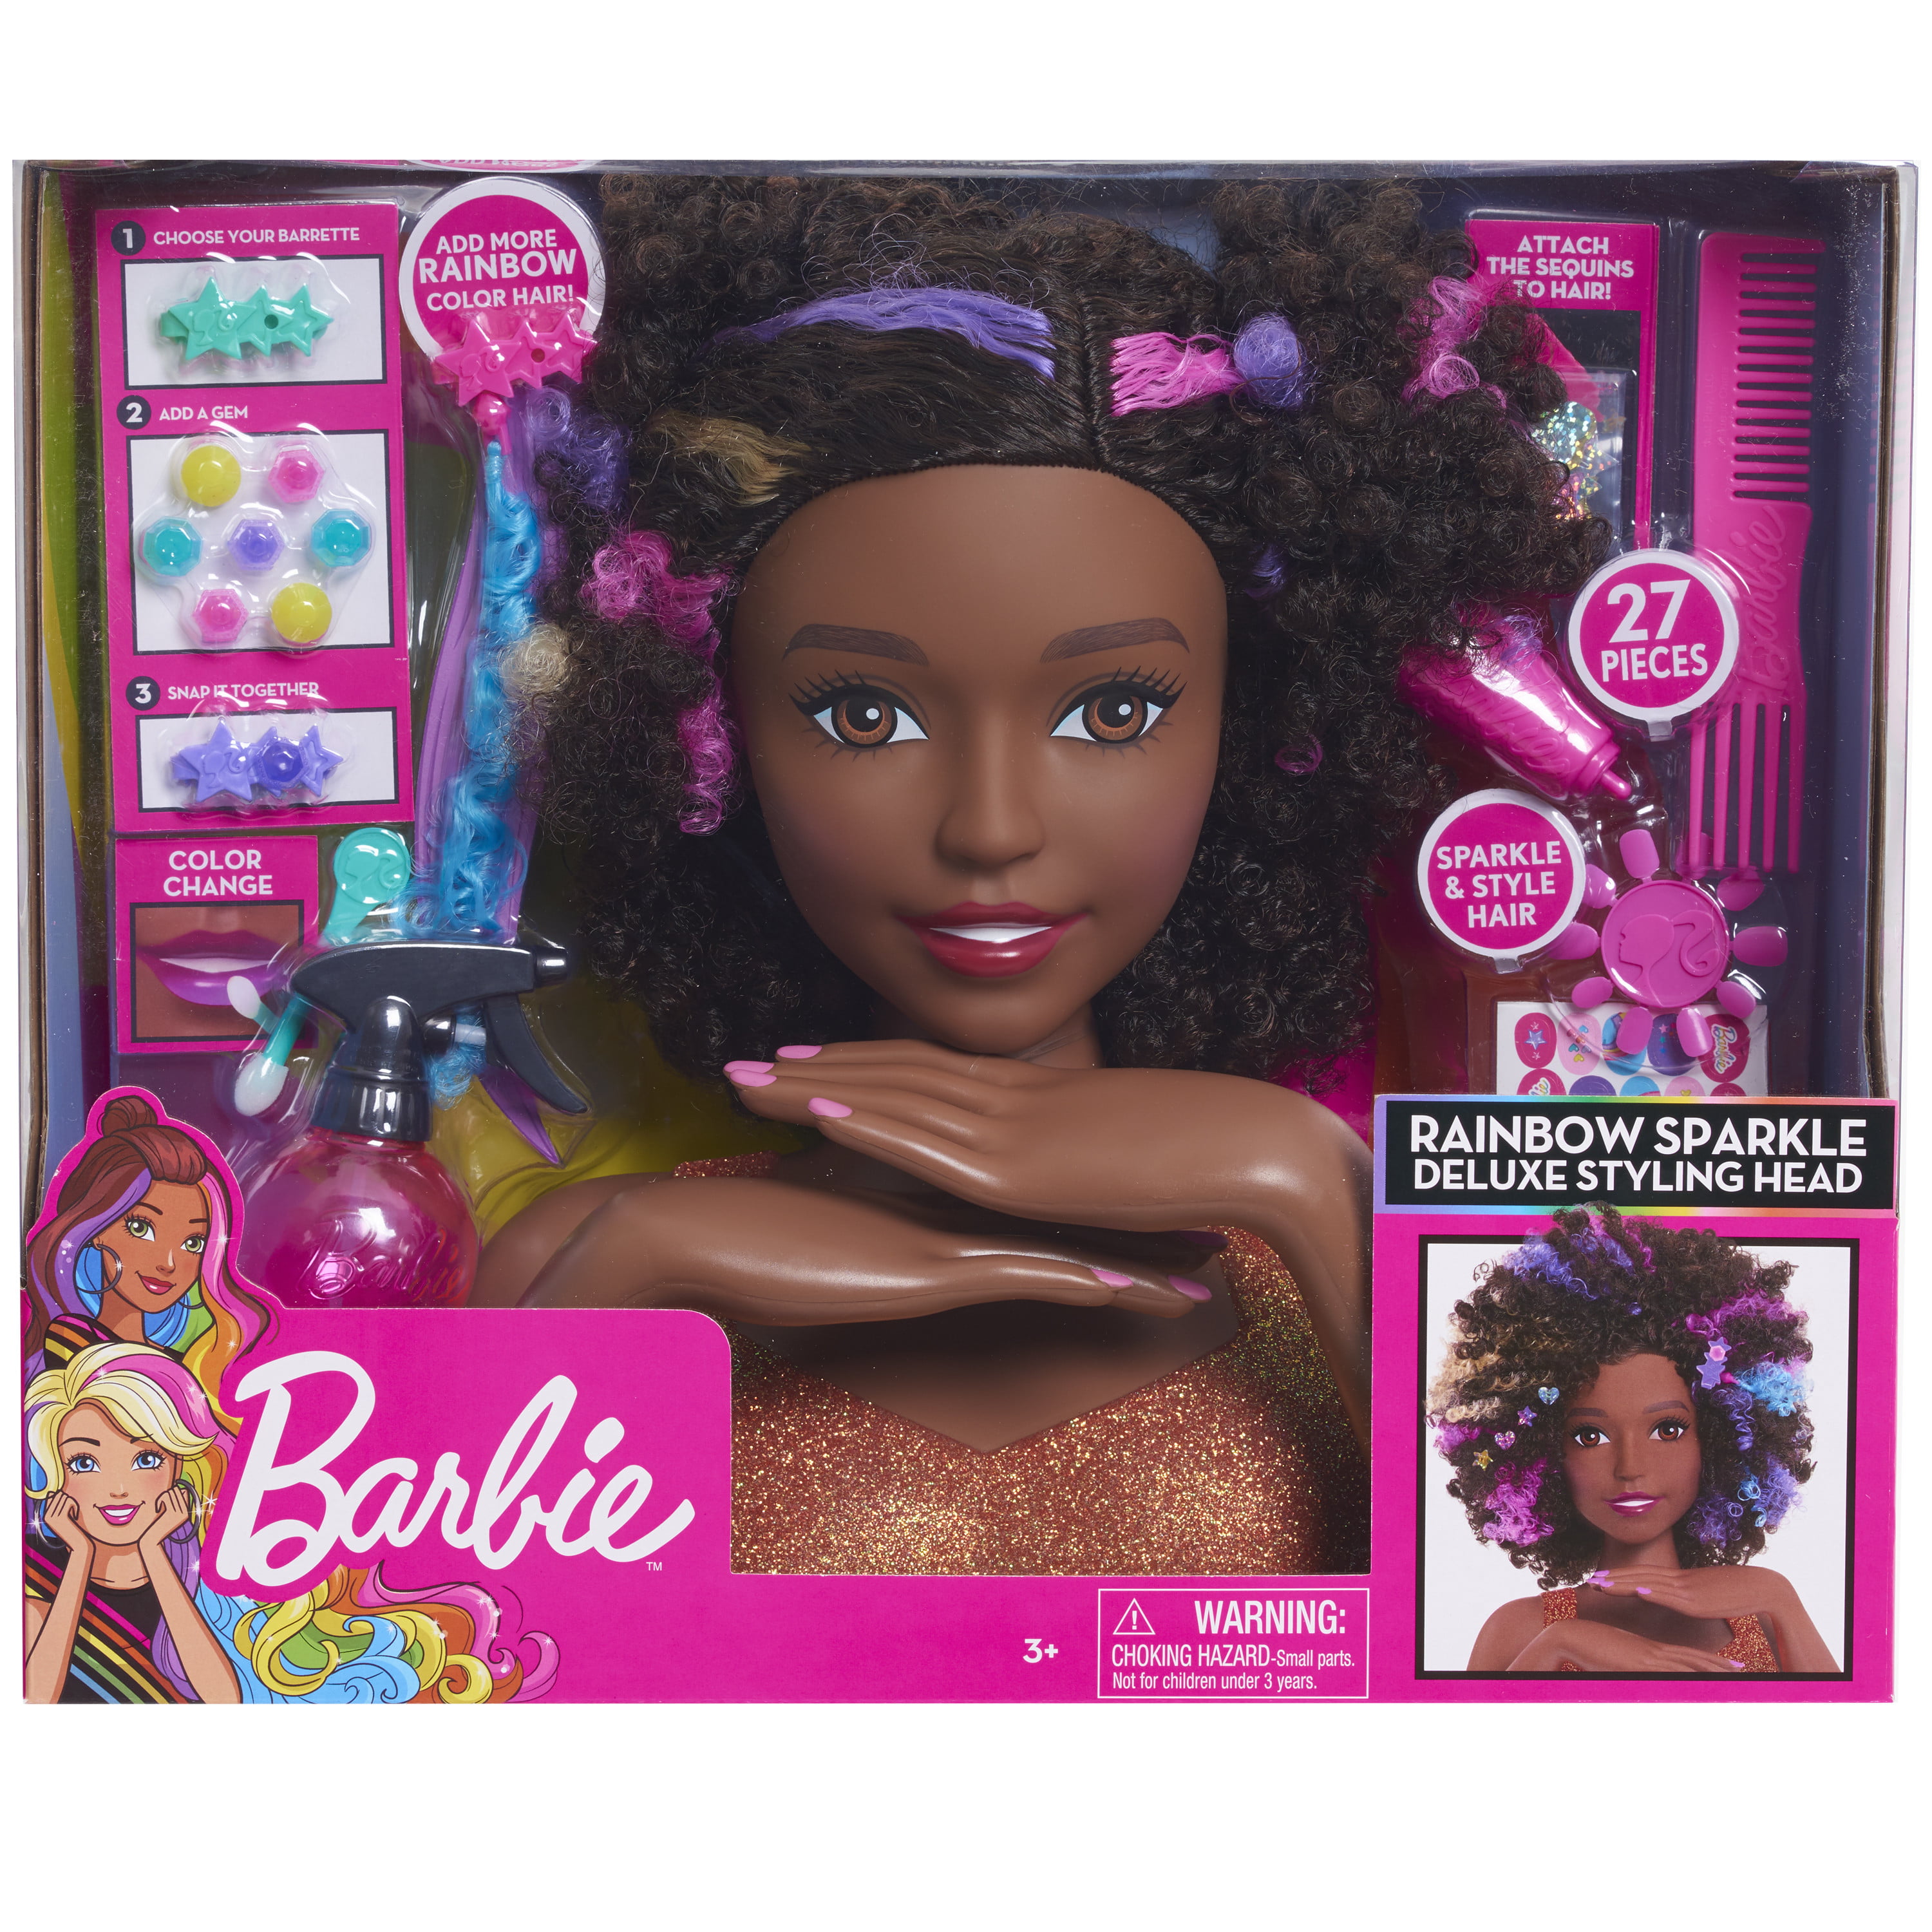 barbie deluxe styling head curly hair